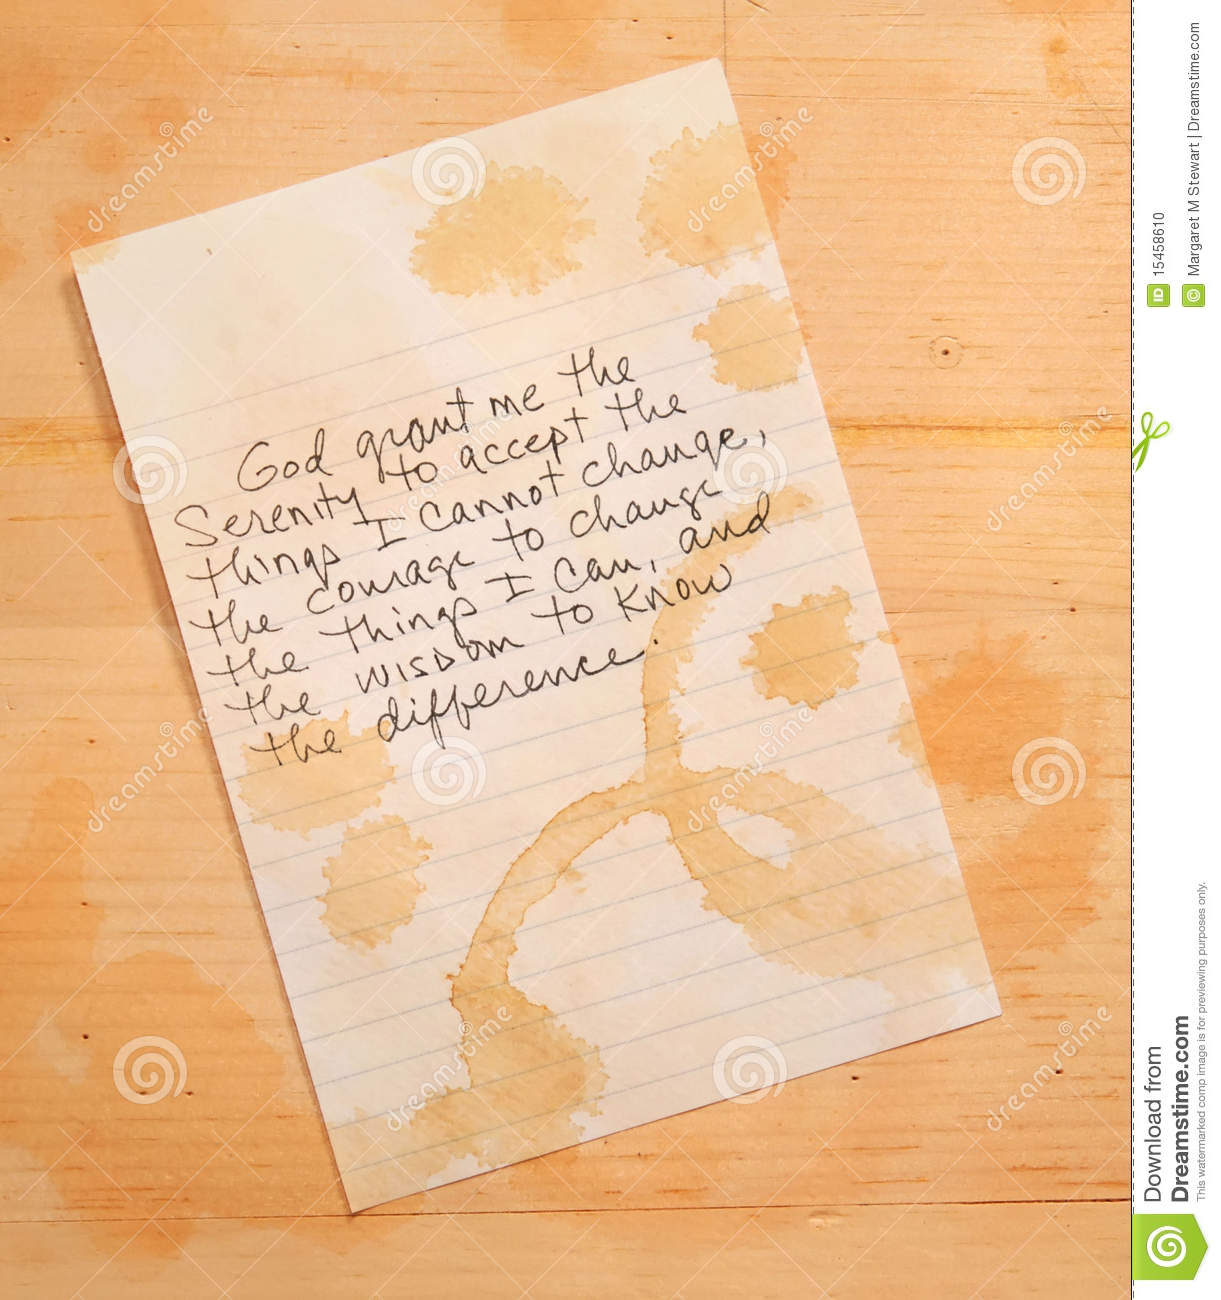 Serenity Prayer Stained With Coffee Rings